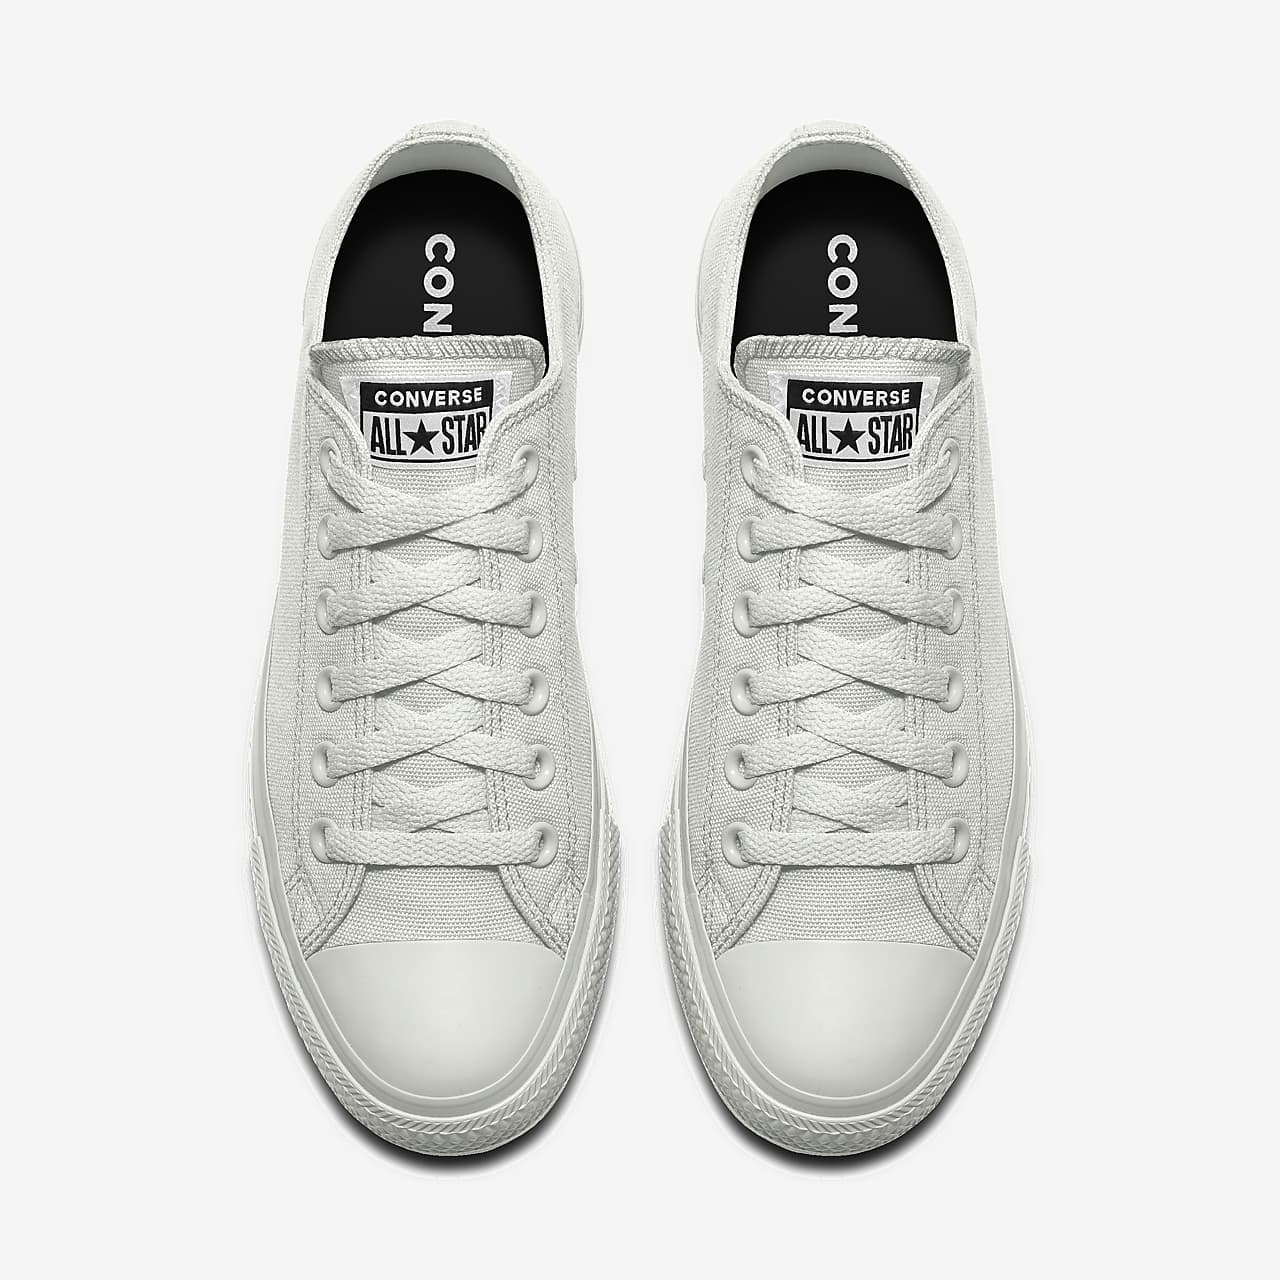 converse all star nike insole